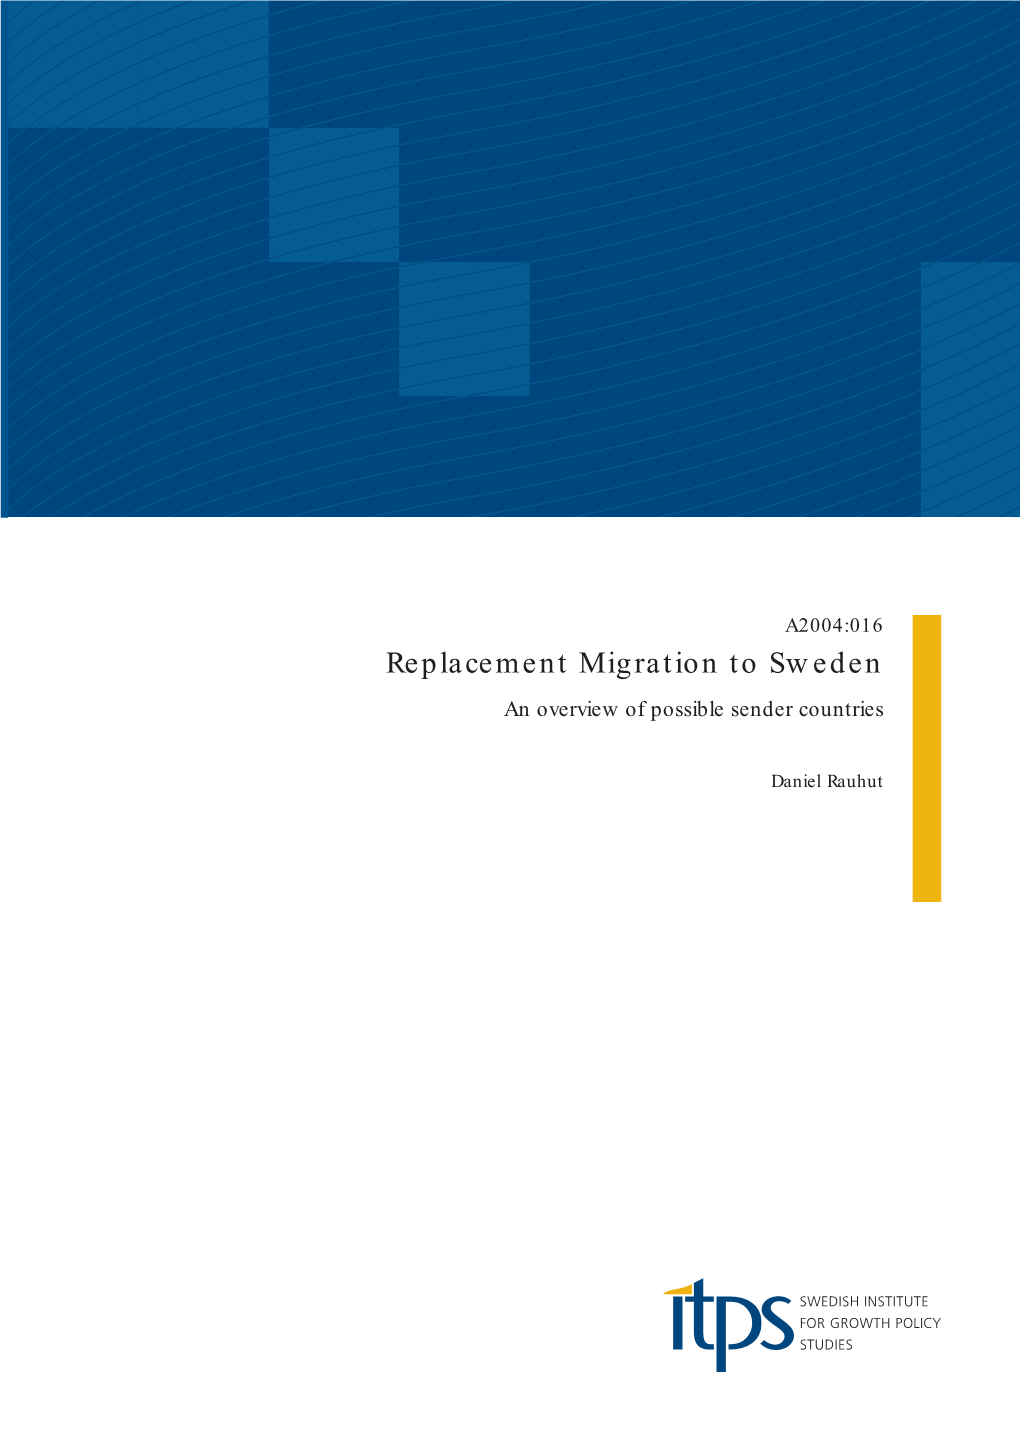 Replacement Migration to Sweden an Overview of Possible Sender Countries